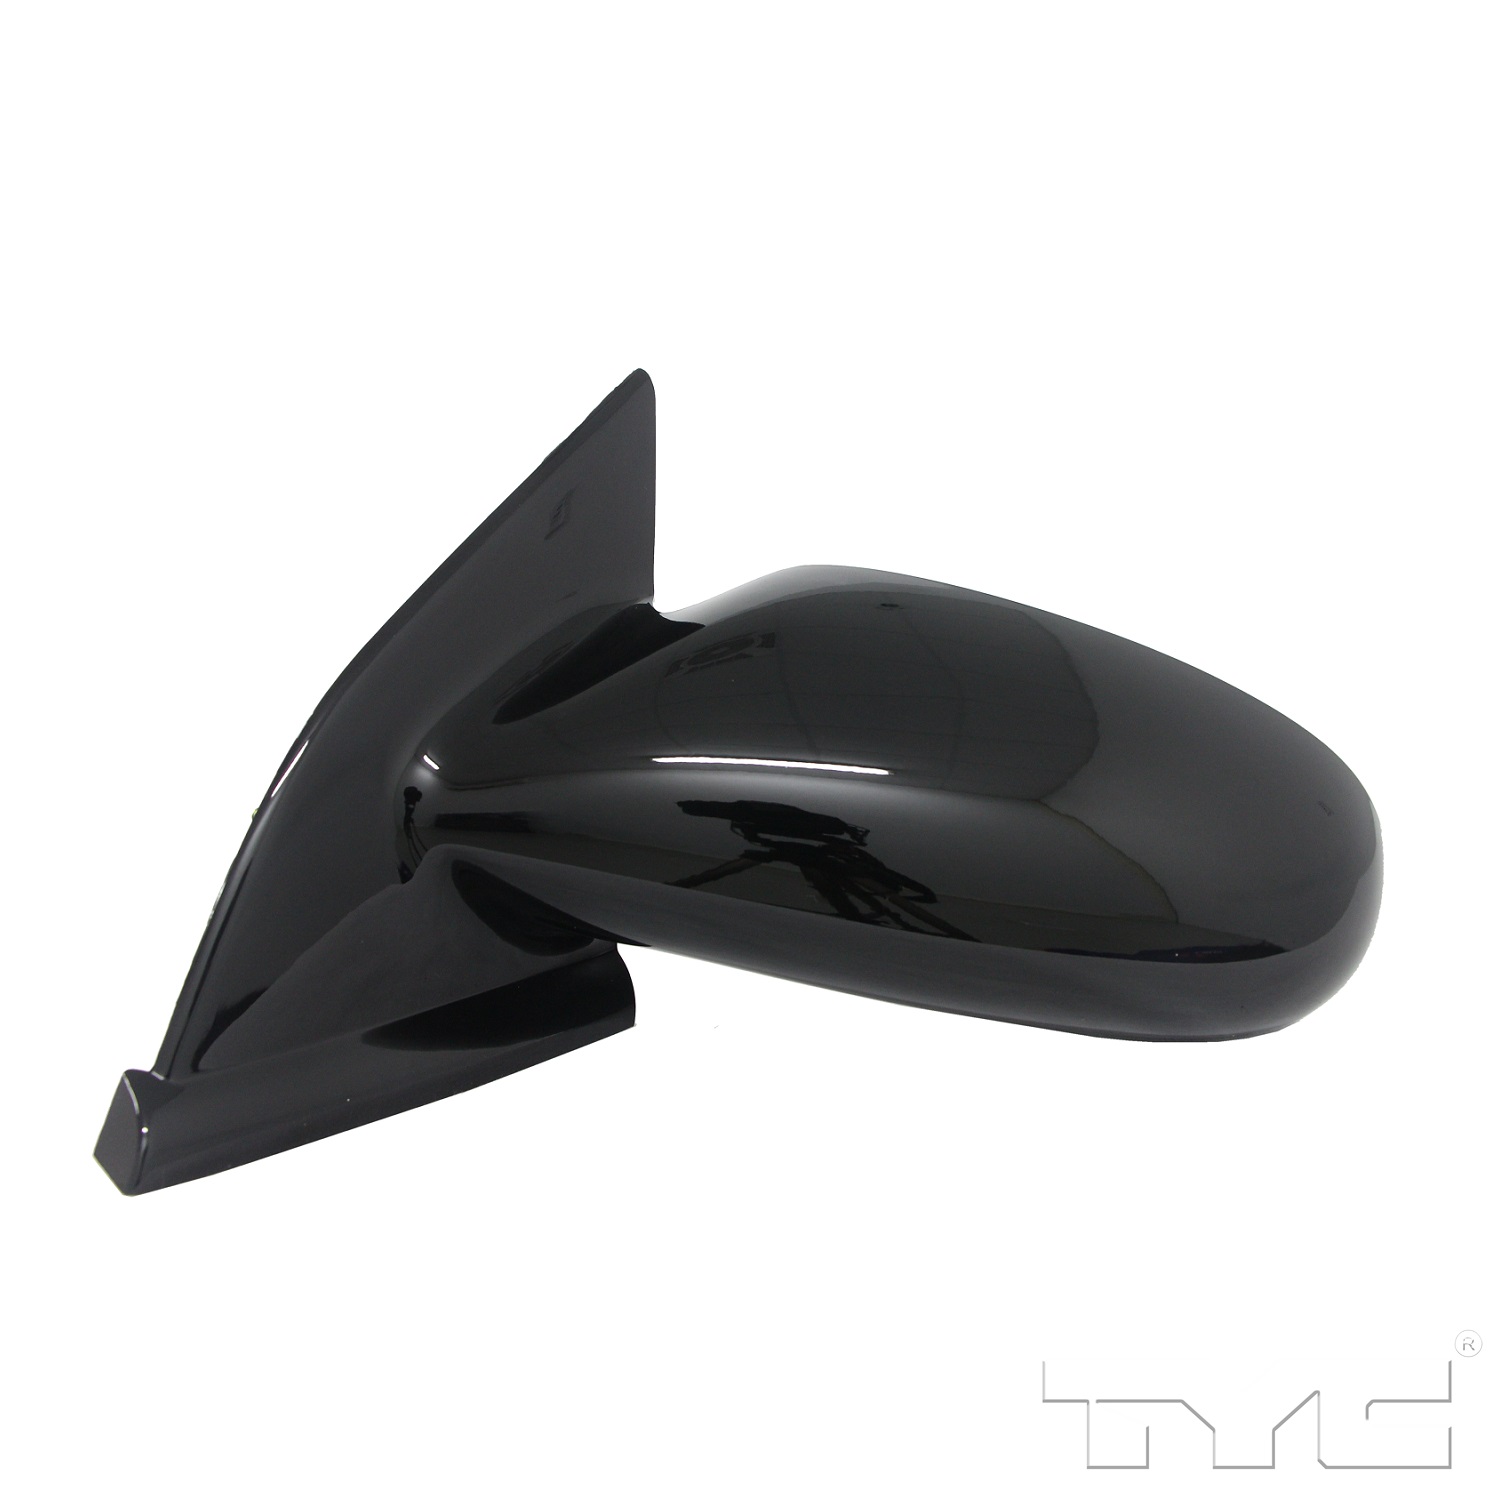 Aftermarket MIRRORS for SATURN - SL2, SL2,96-02,LT Mirror outside rear view